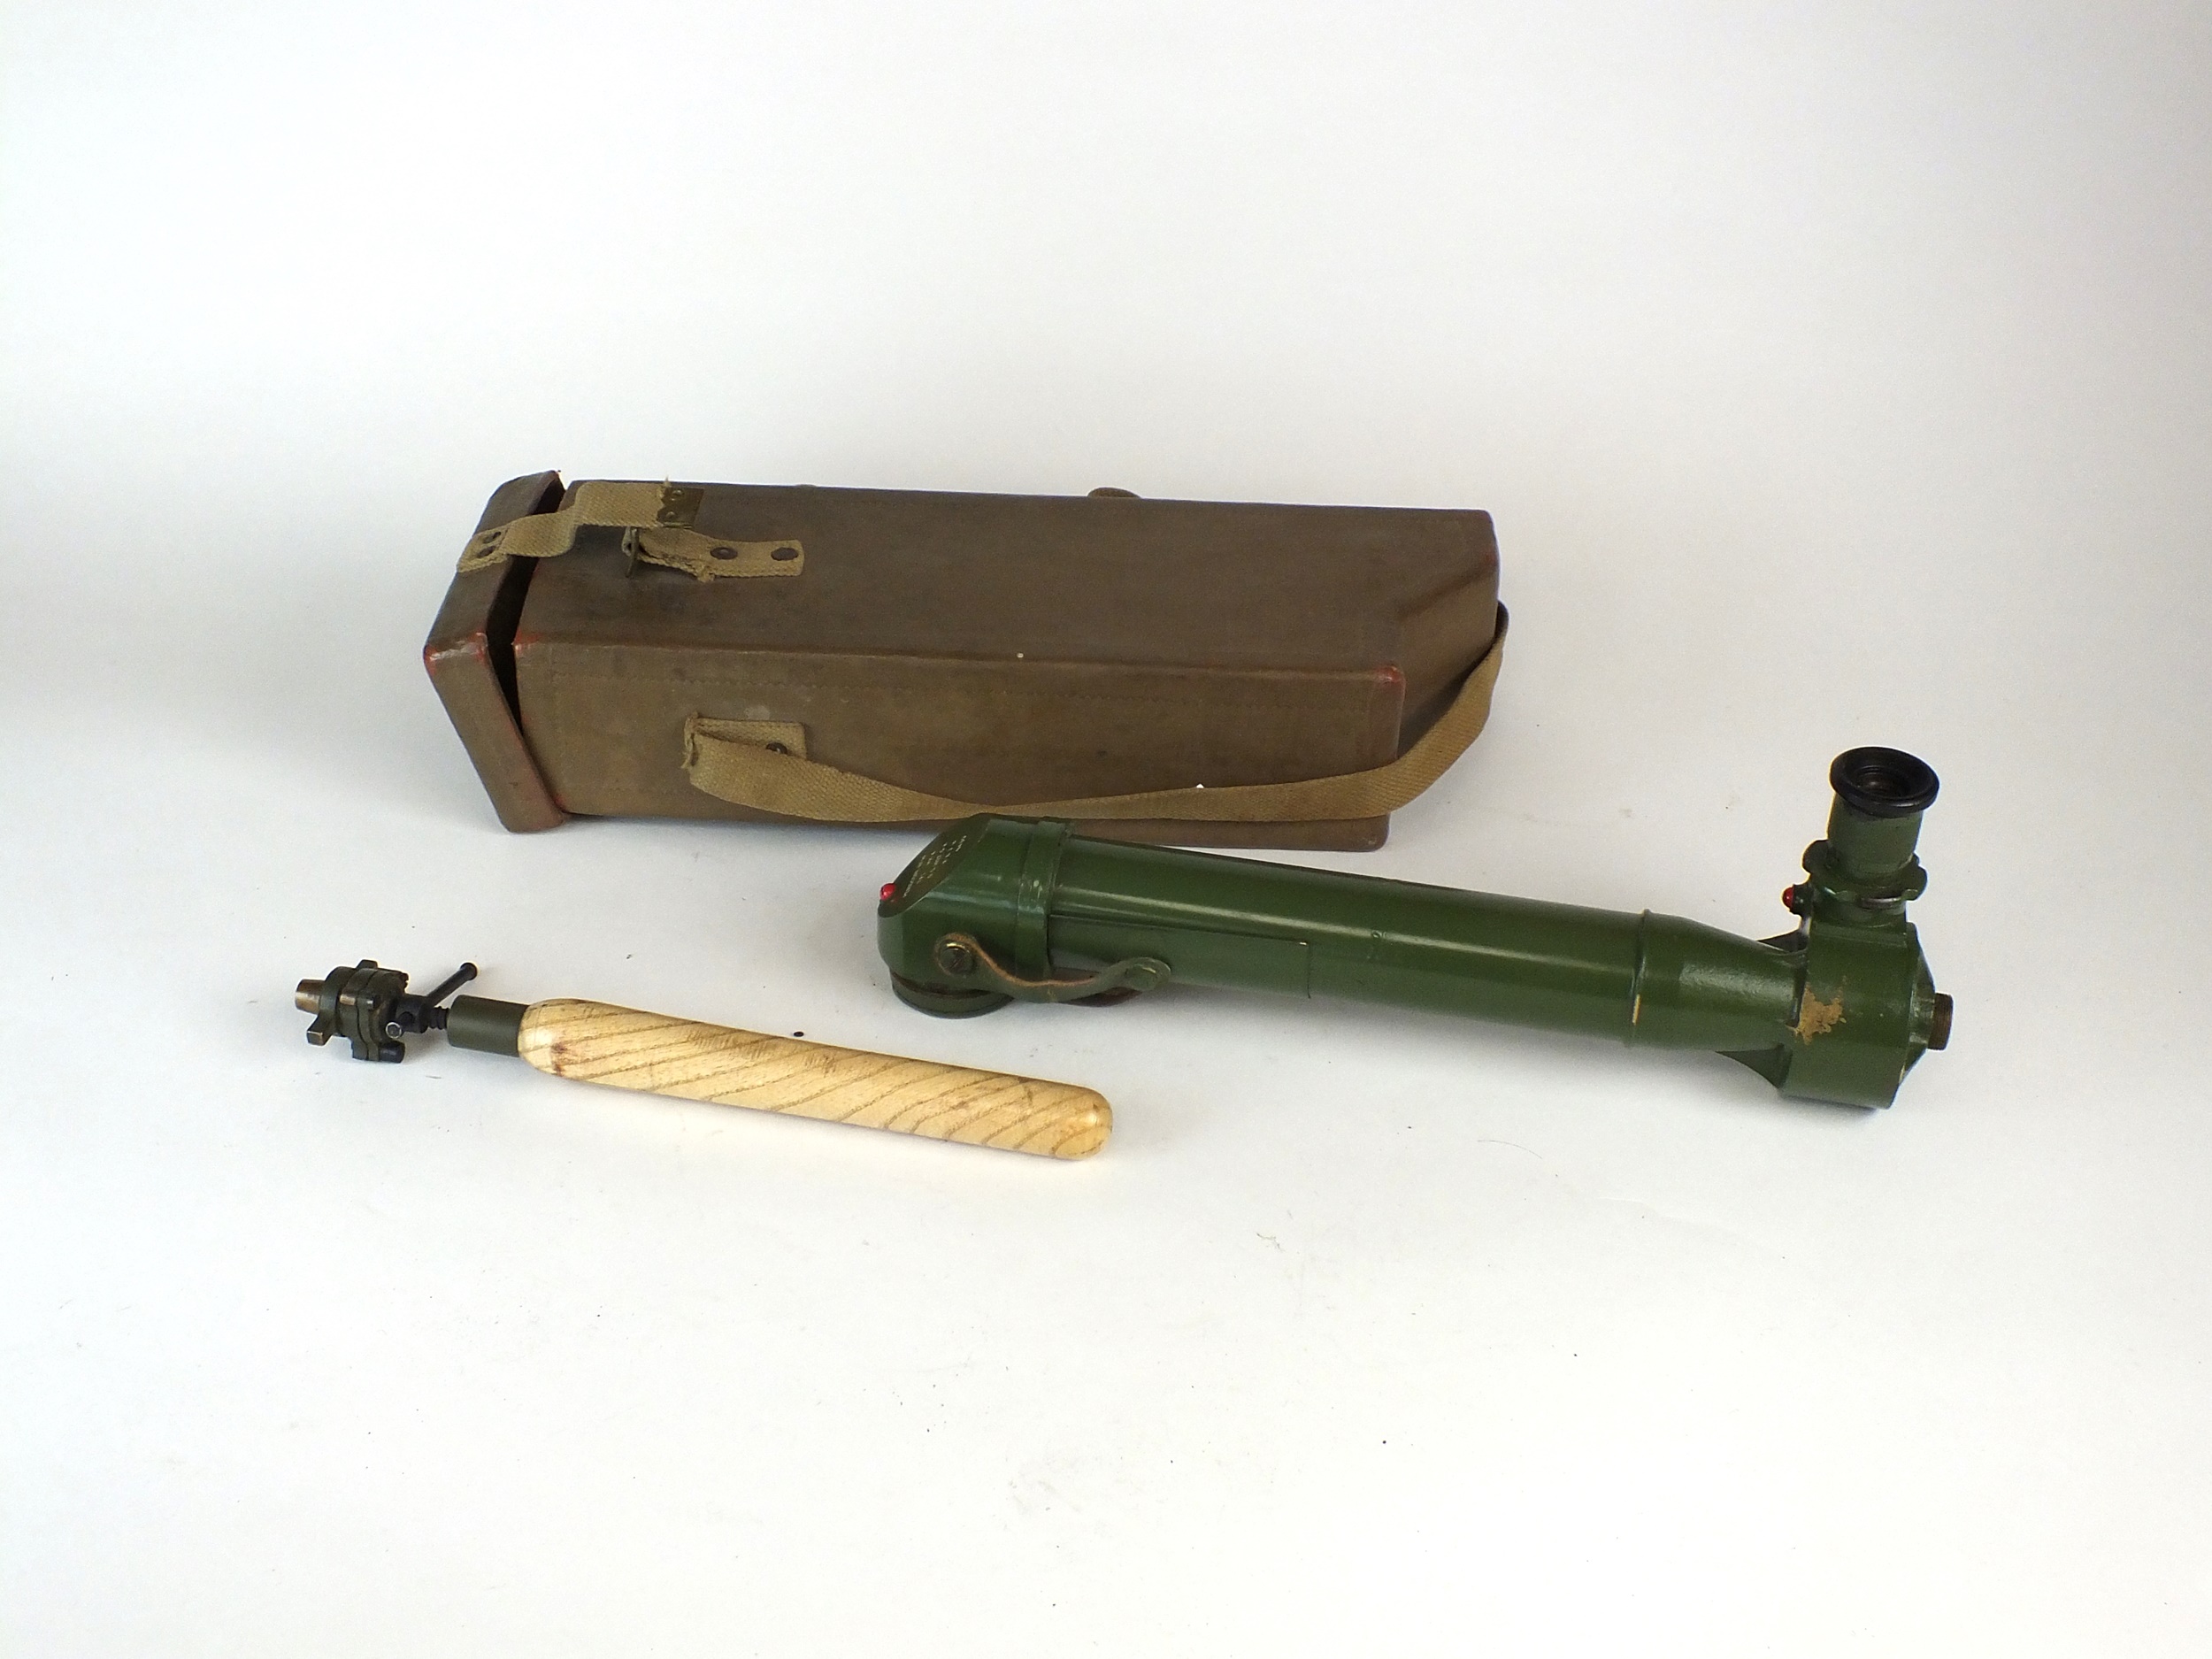 A Second World War trench periscope by R&J Beck, no.14 Mk4, painted in olive green with an